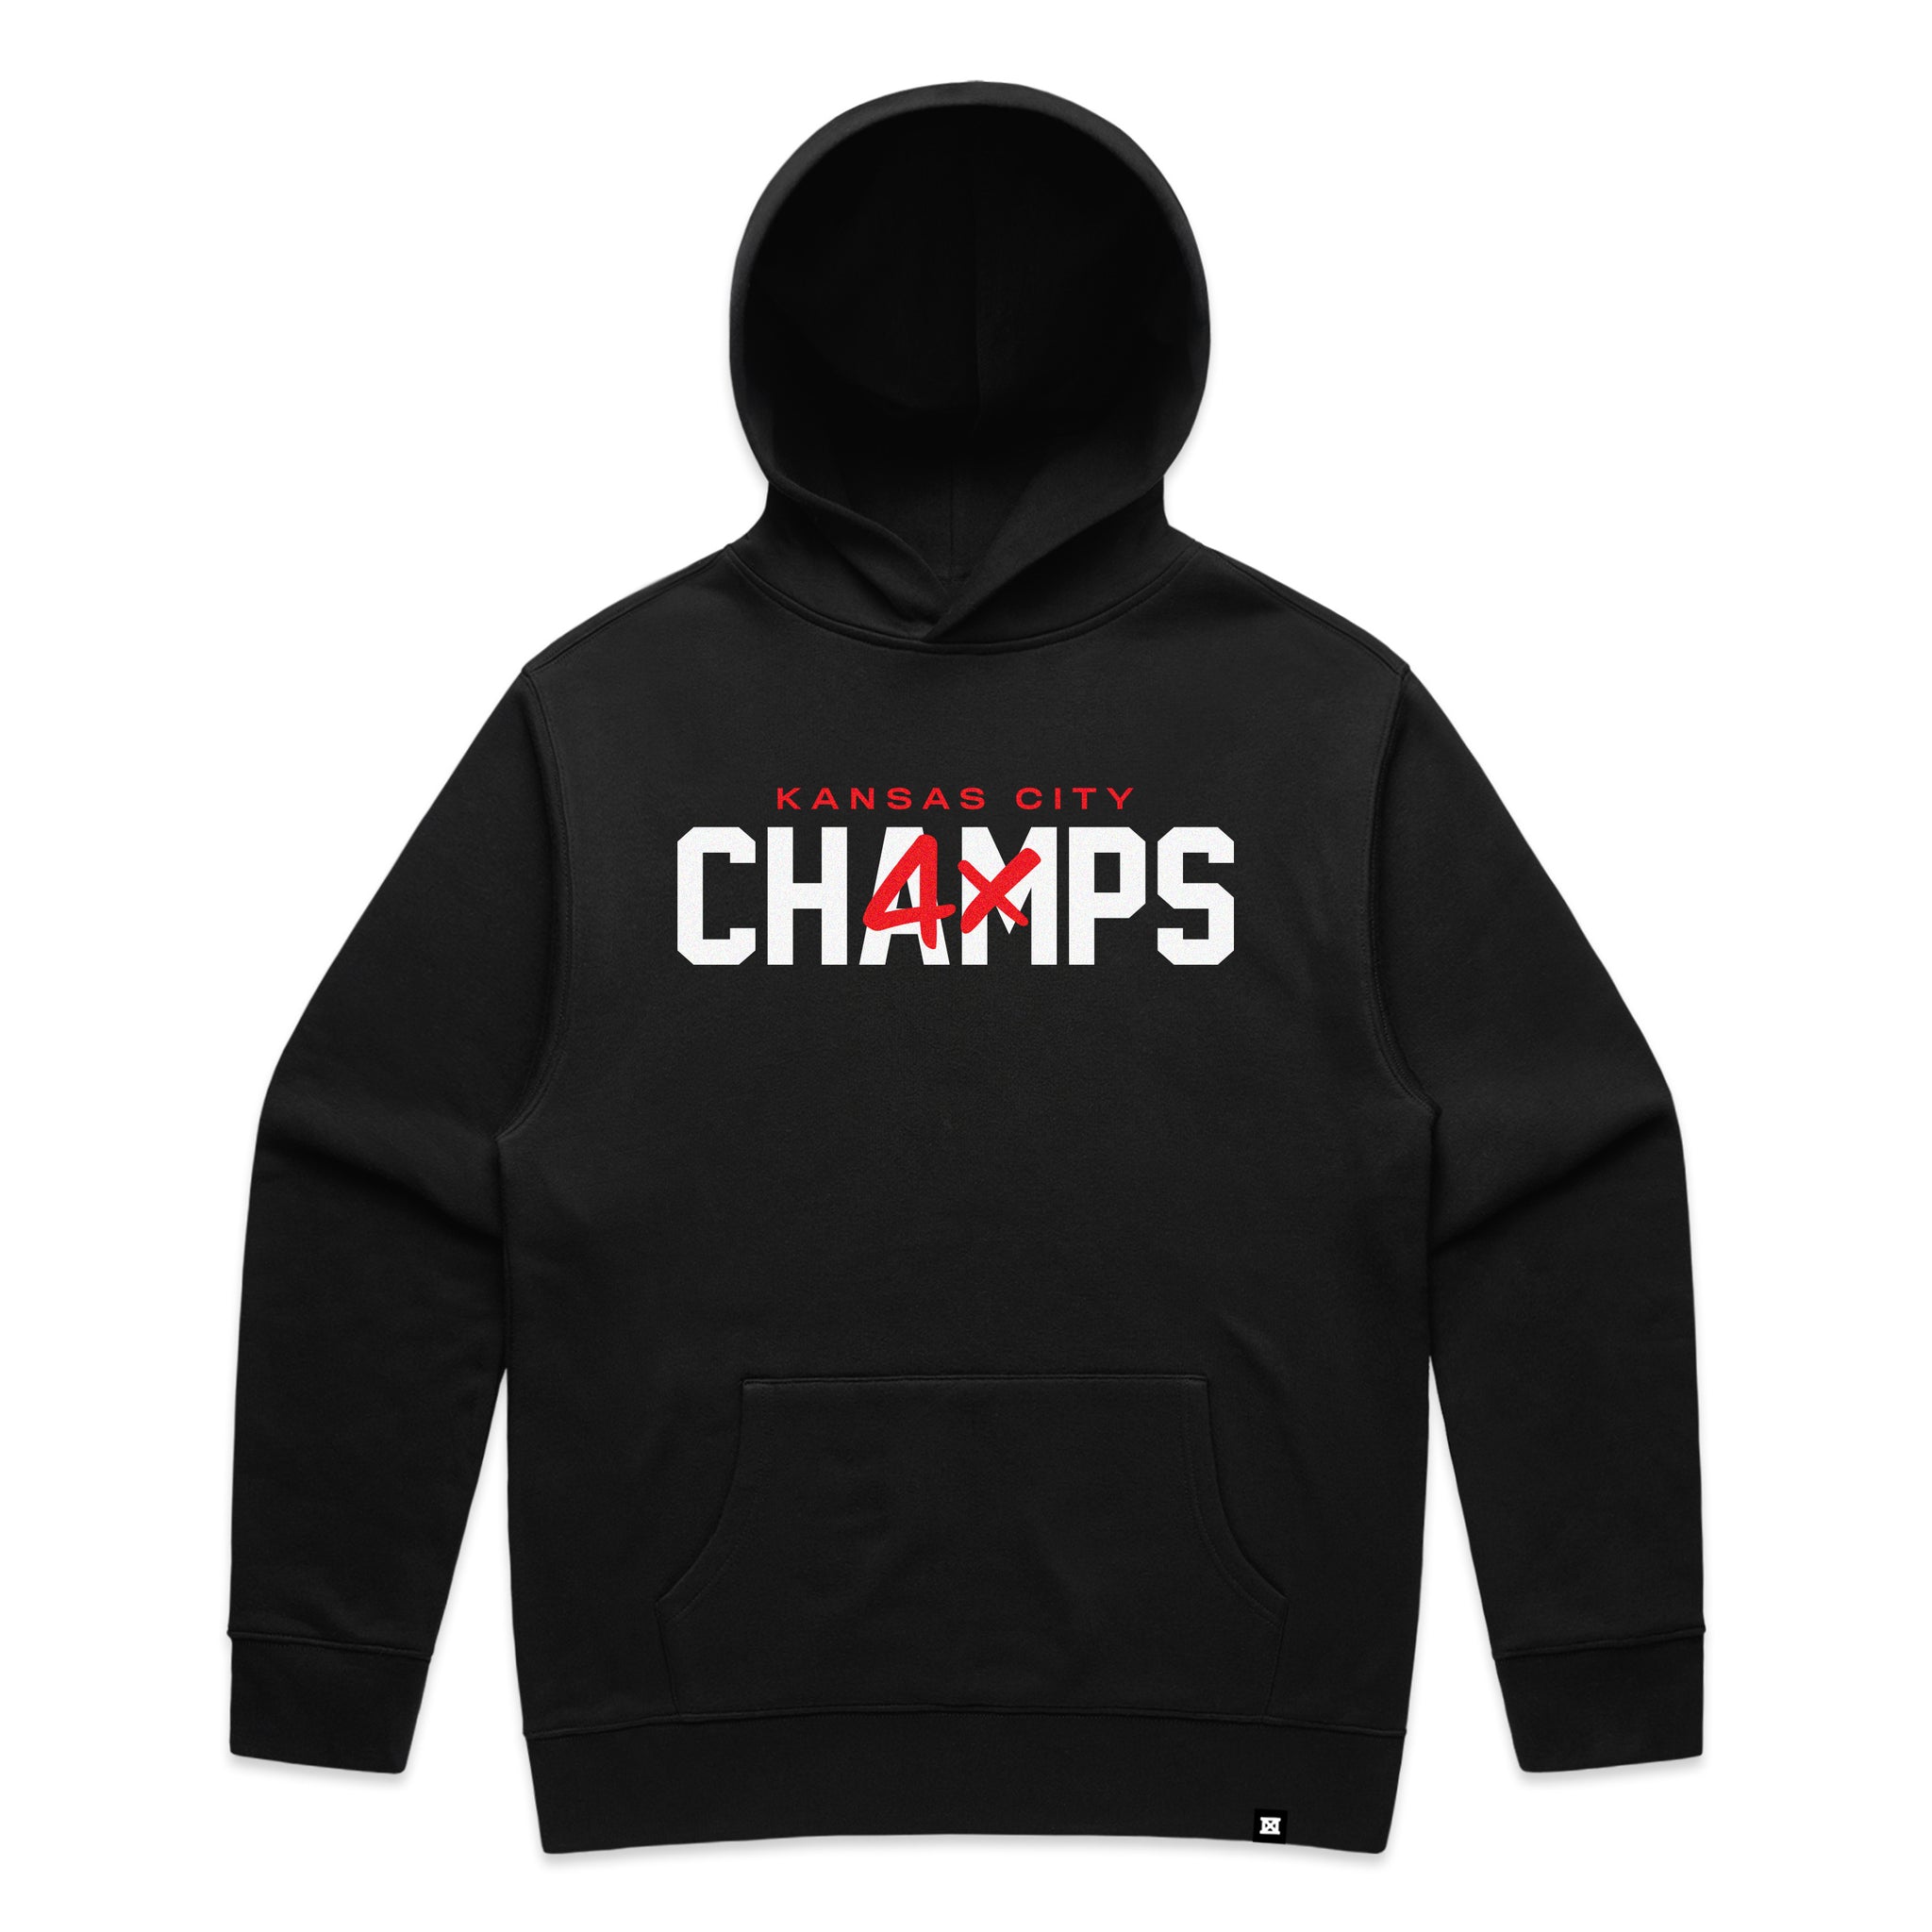 PRE-ORDER: 4X CHAMPS Hoodie